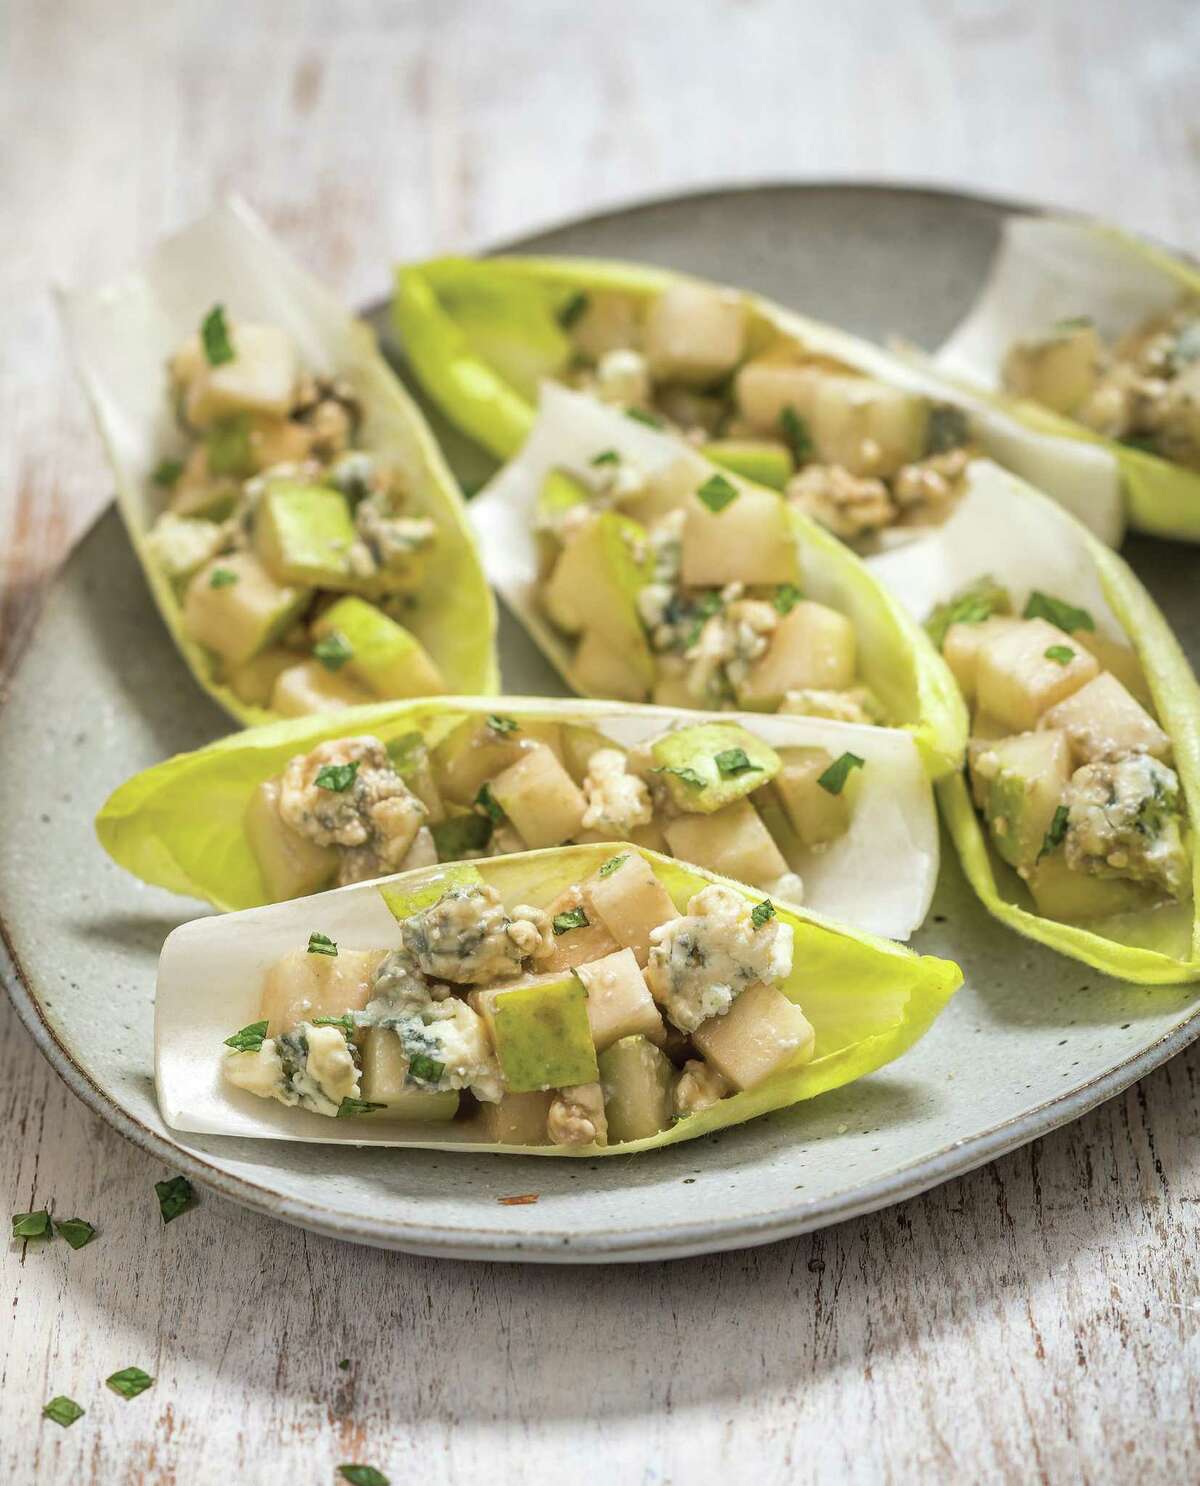 Pear and Blue Cheese Endive Boats from "Bring It!" by Ali Rosen.